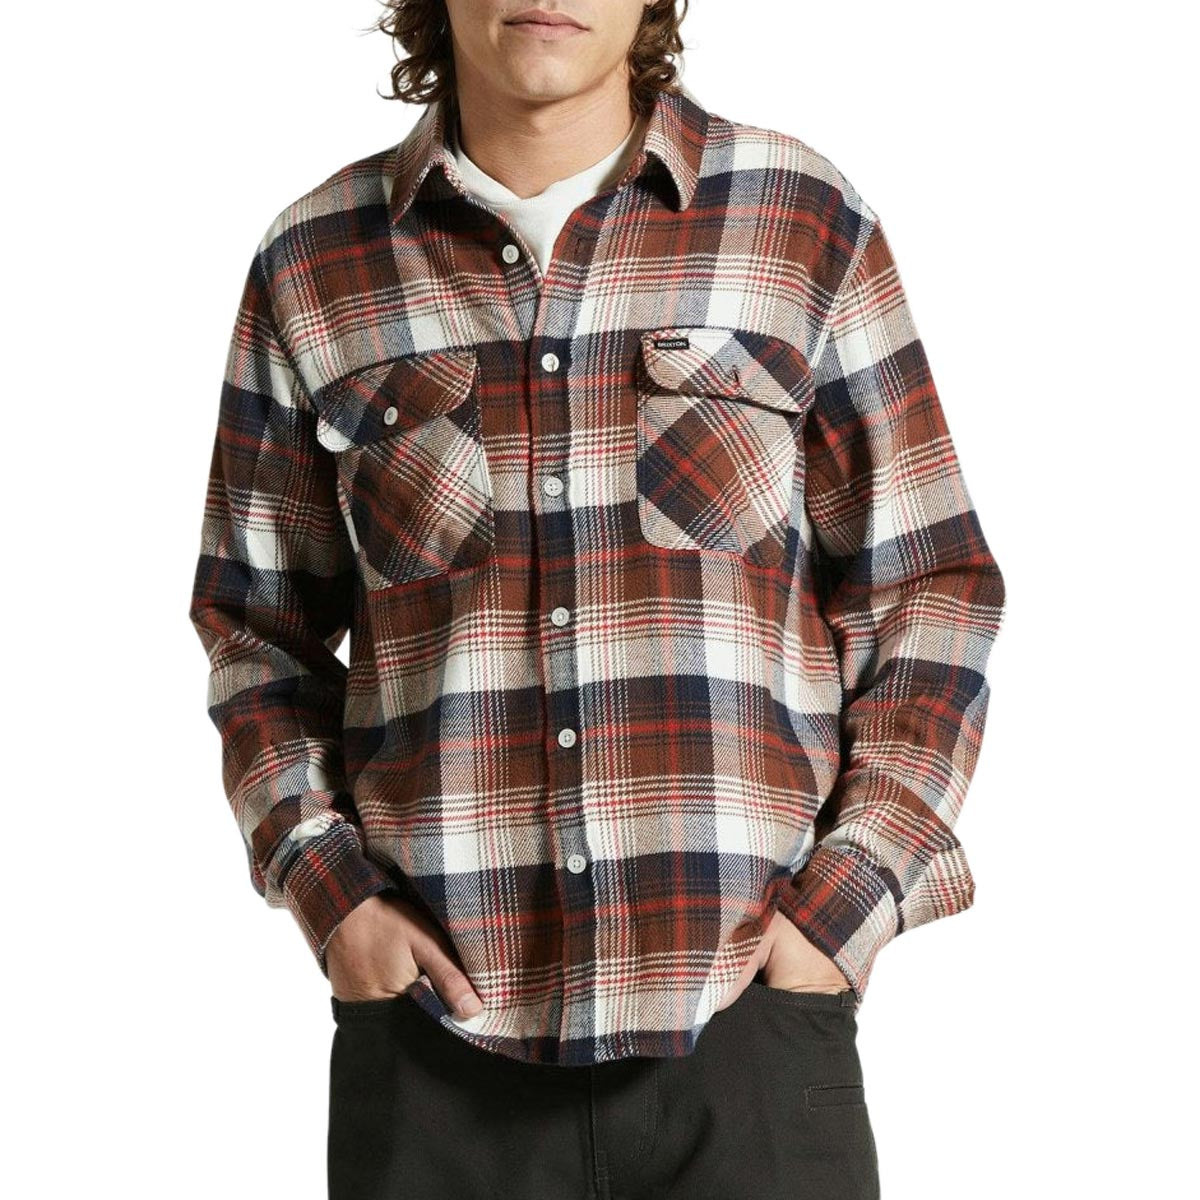 Brixton Bowery Flannel Long Sleeve Shirt - Washed Navy/Sepia/Off White image 1